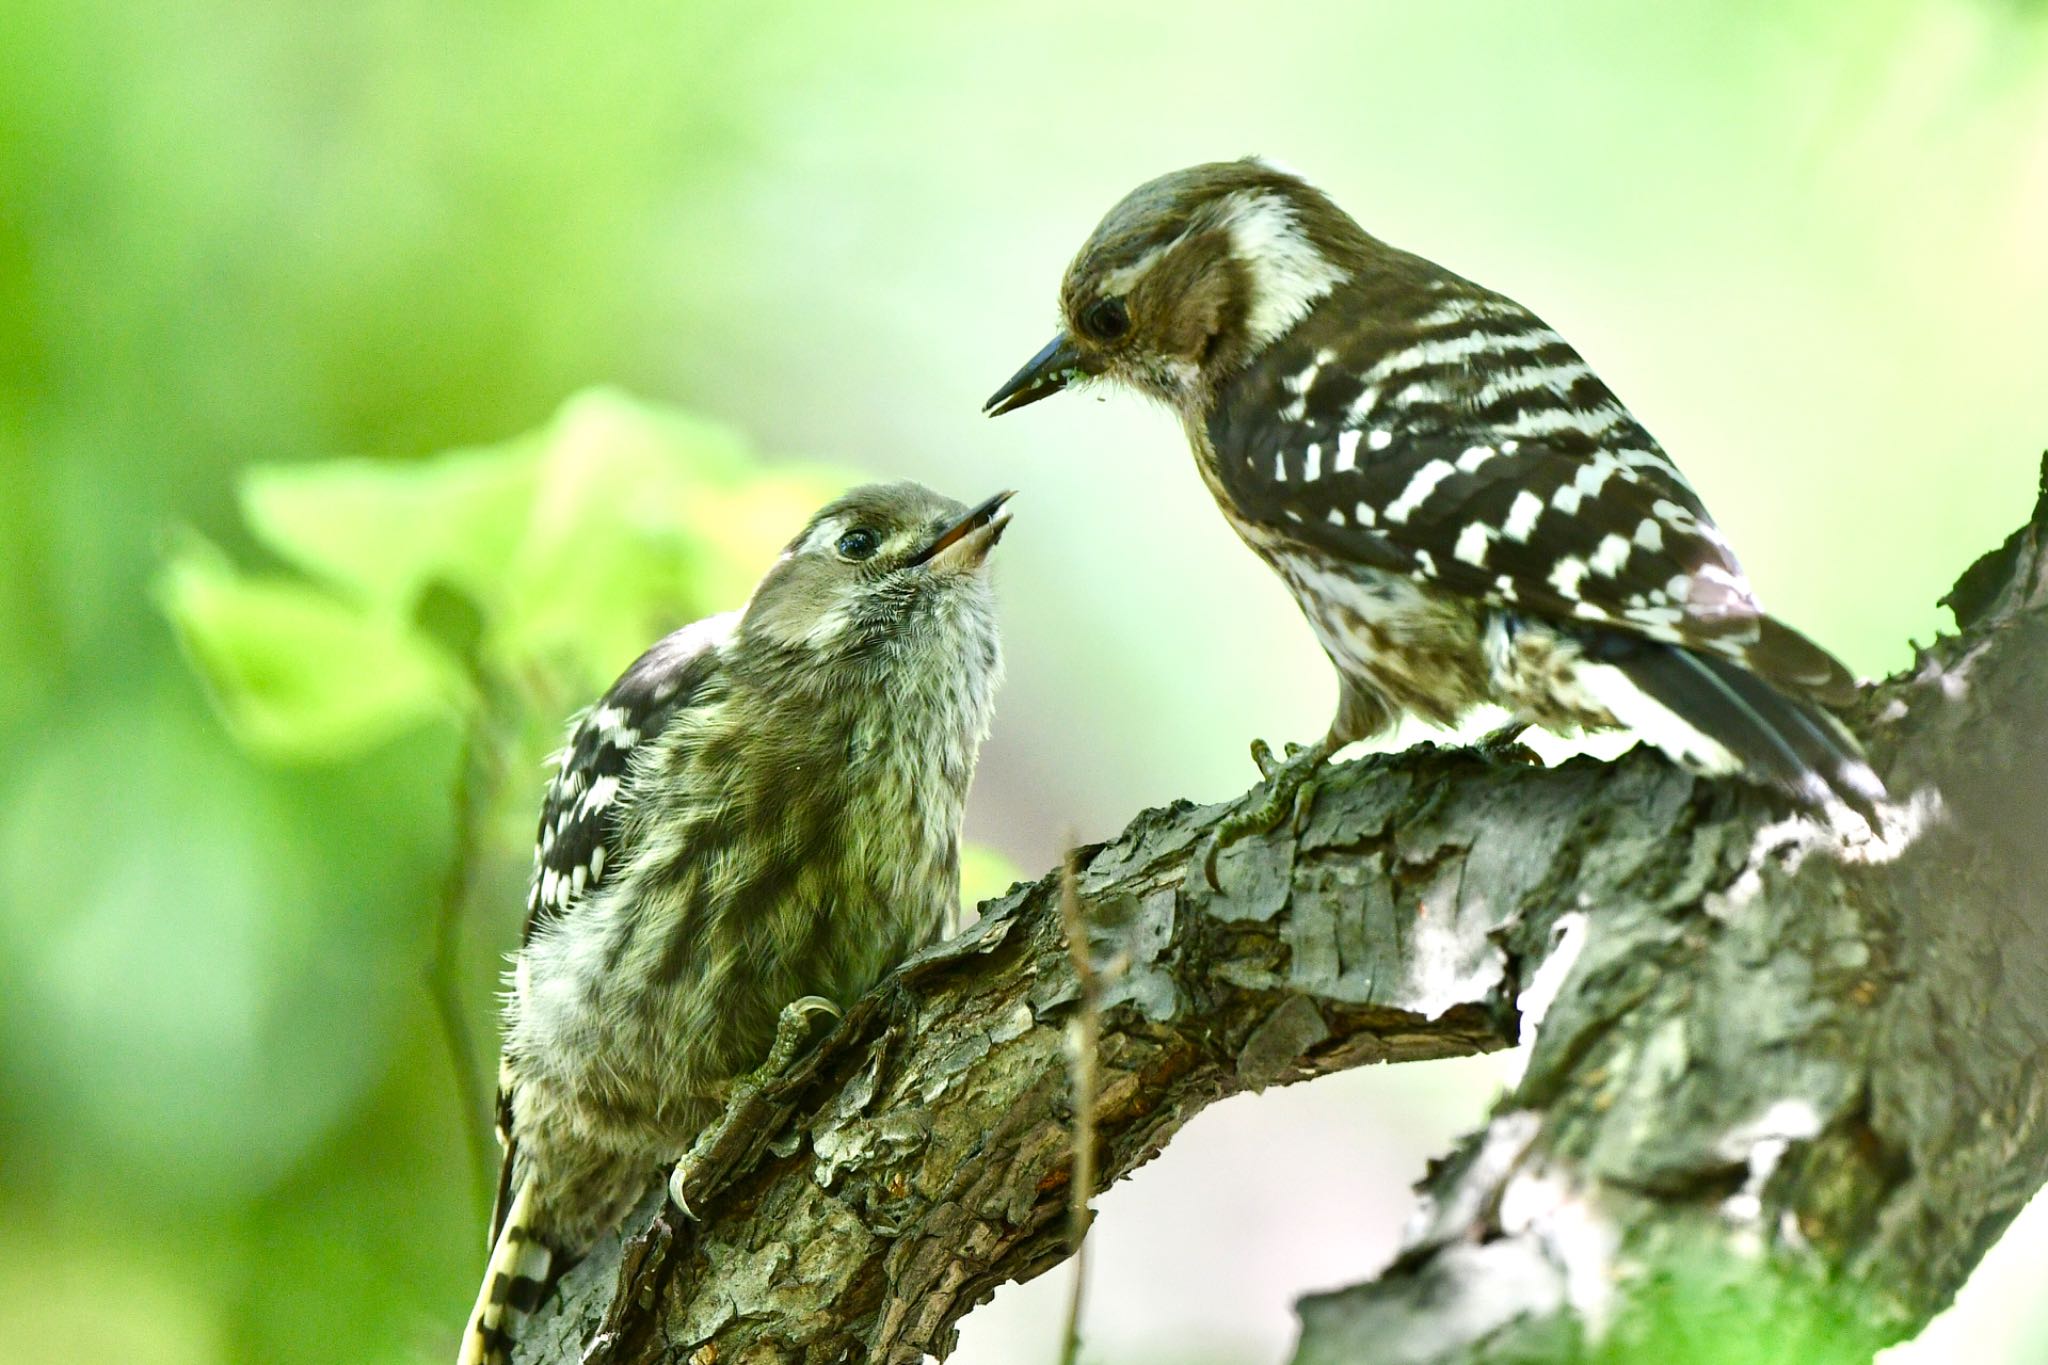 Photo of Japanese Pygmy Woodpecker at 舞鶴公園 by にょろちょろ